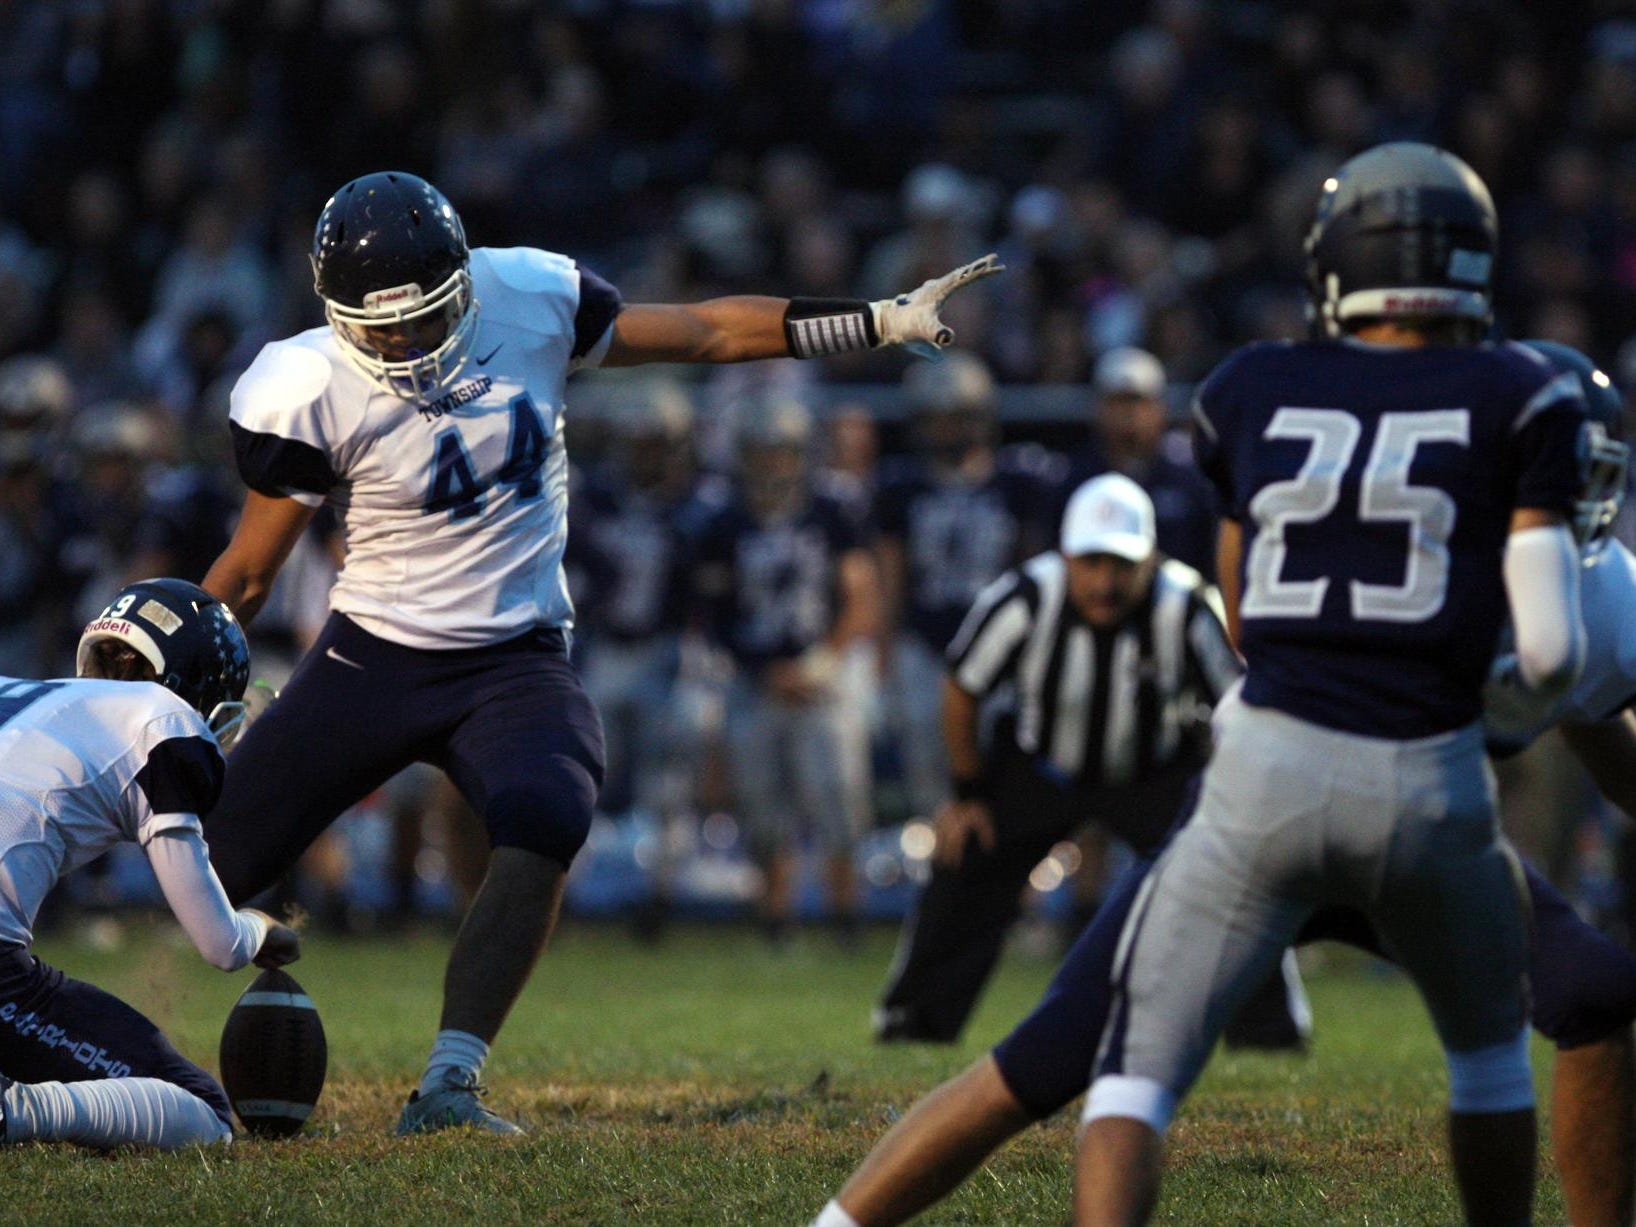 Nick Galenti, #44 Freehold Township, kicks a successful extra point with holder Kevin Doherty, #9, as they play Howell in a football game Friday, September 25, 2015, at Howell High School.